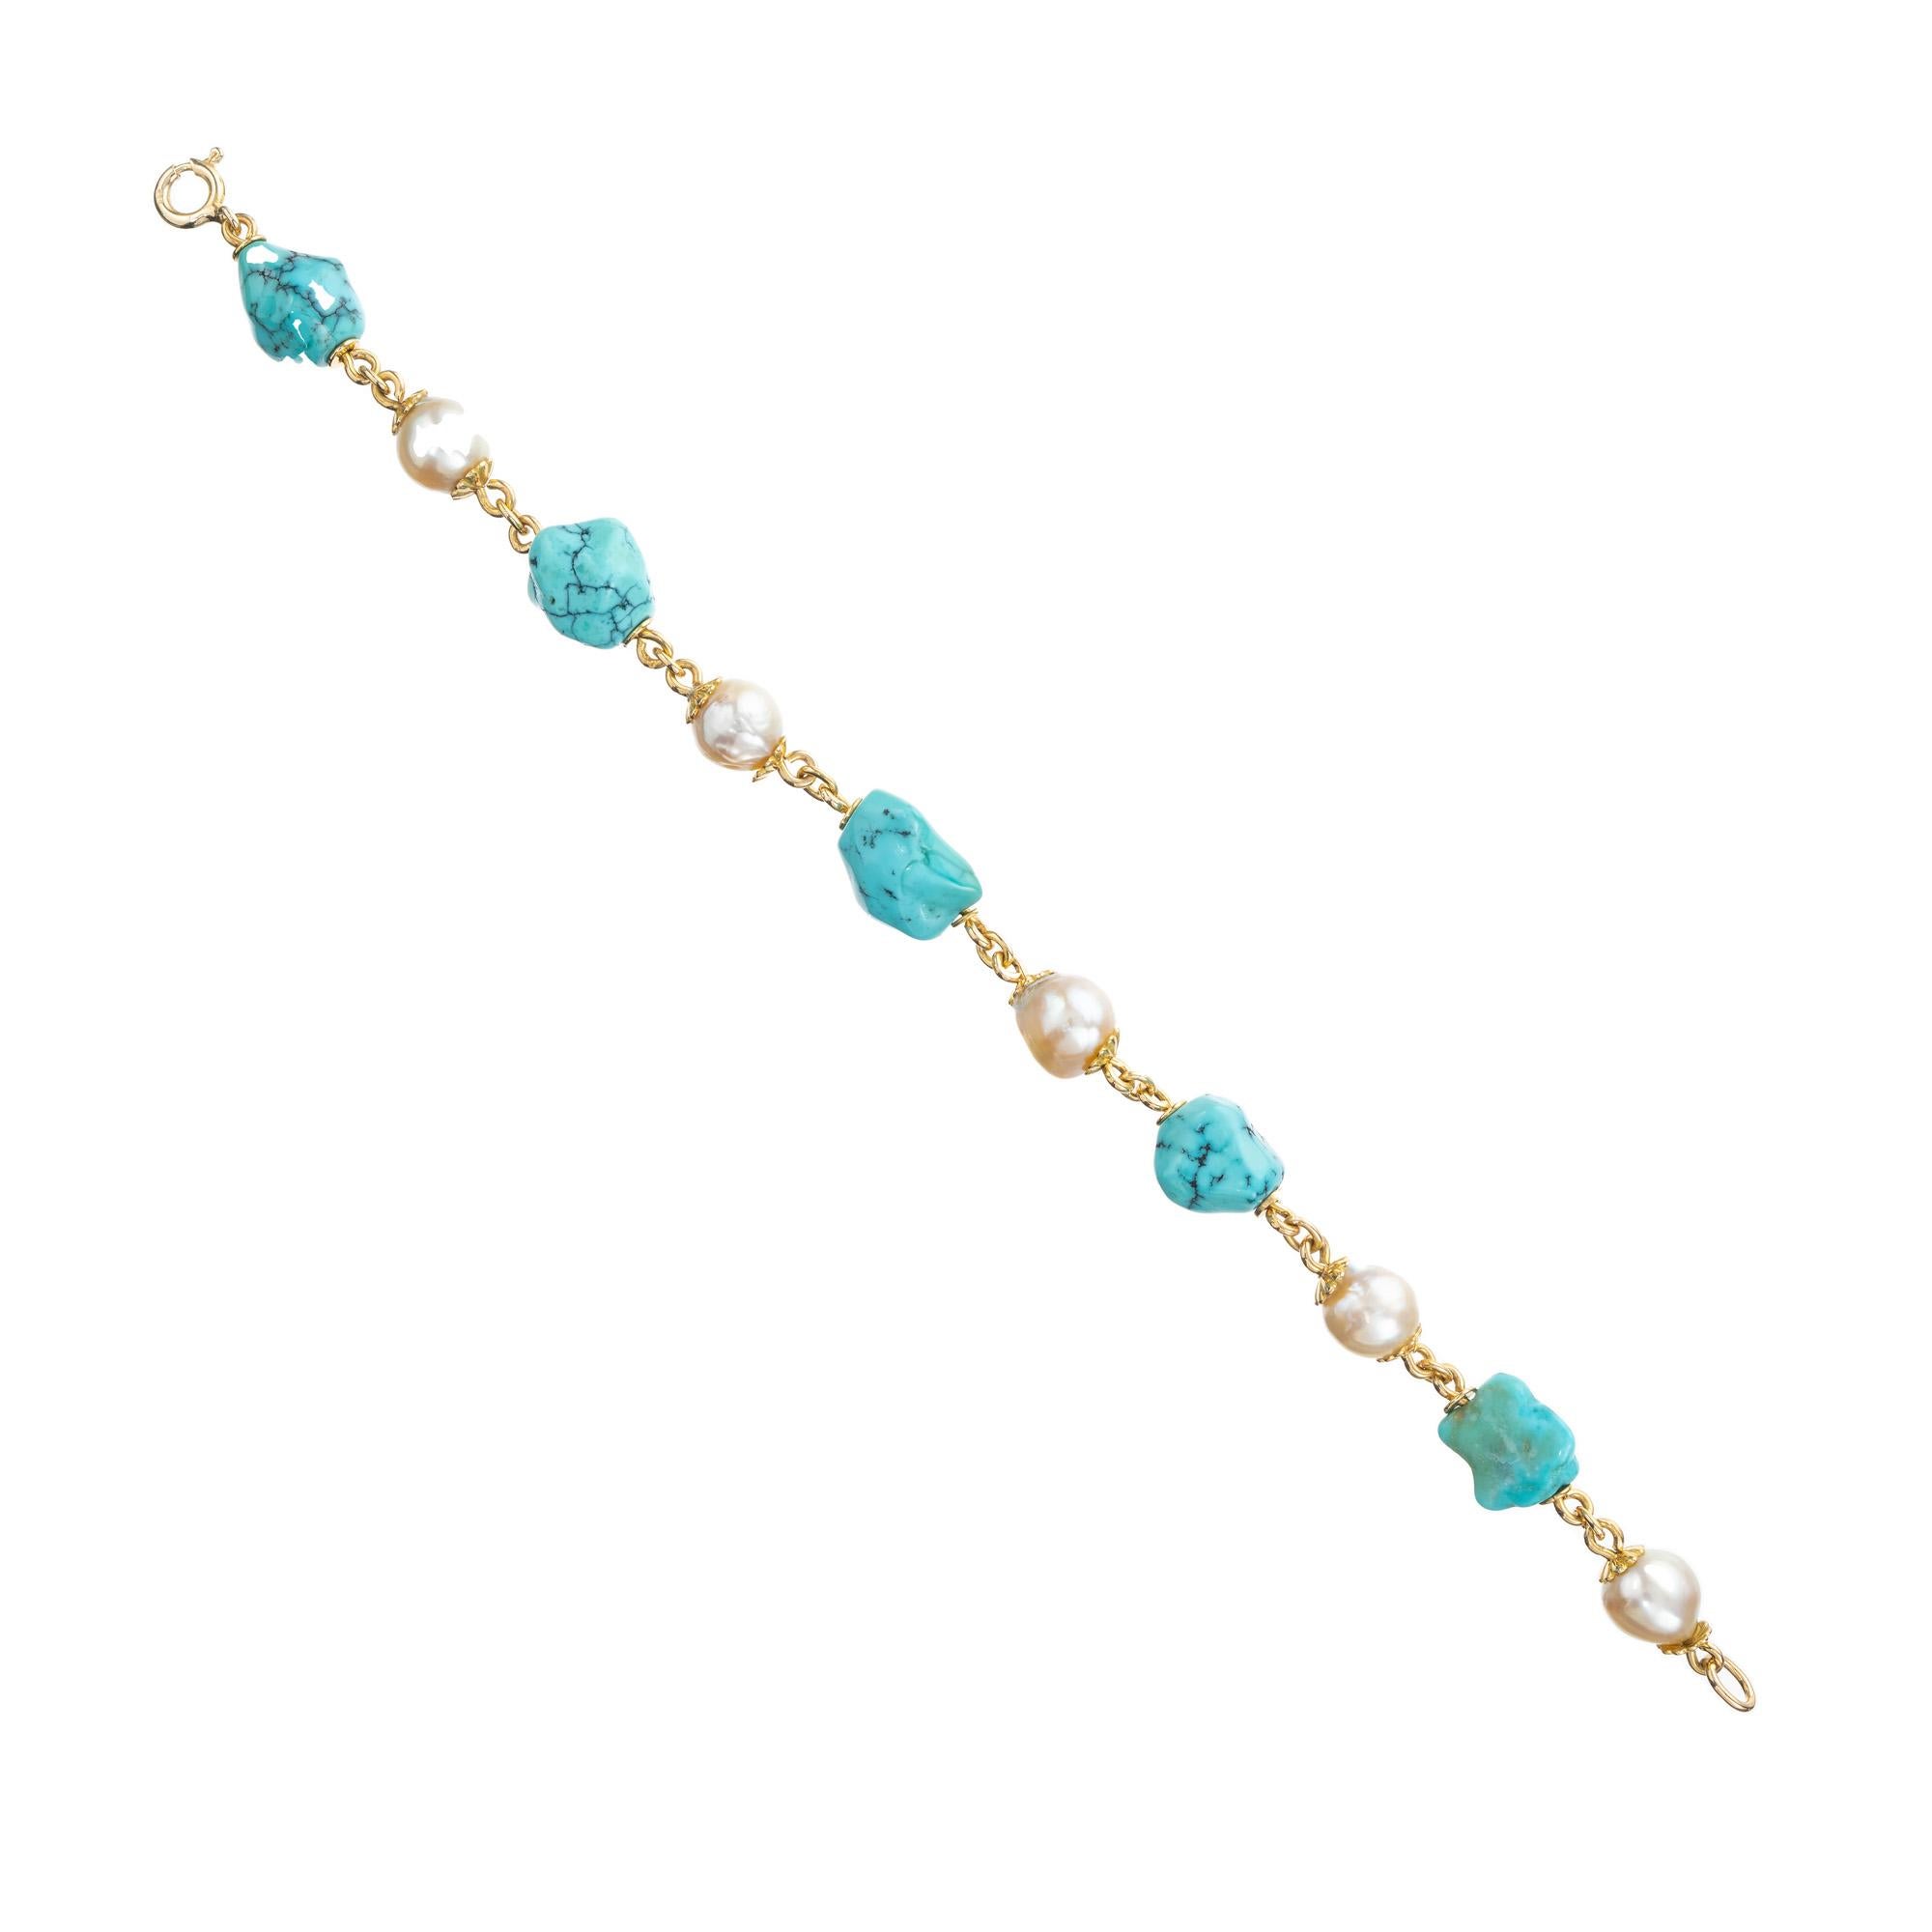 Wonderful 1950's handmade natural turquoise nugget bracelet with akoya cultured pearls. 5 semi baroque pearls that alternate with 5 natural blue turquoise nuggets. Heavy hand twisted 14k yellow gold wire, connects the gemstones. The bracelet